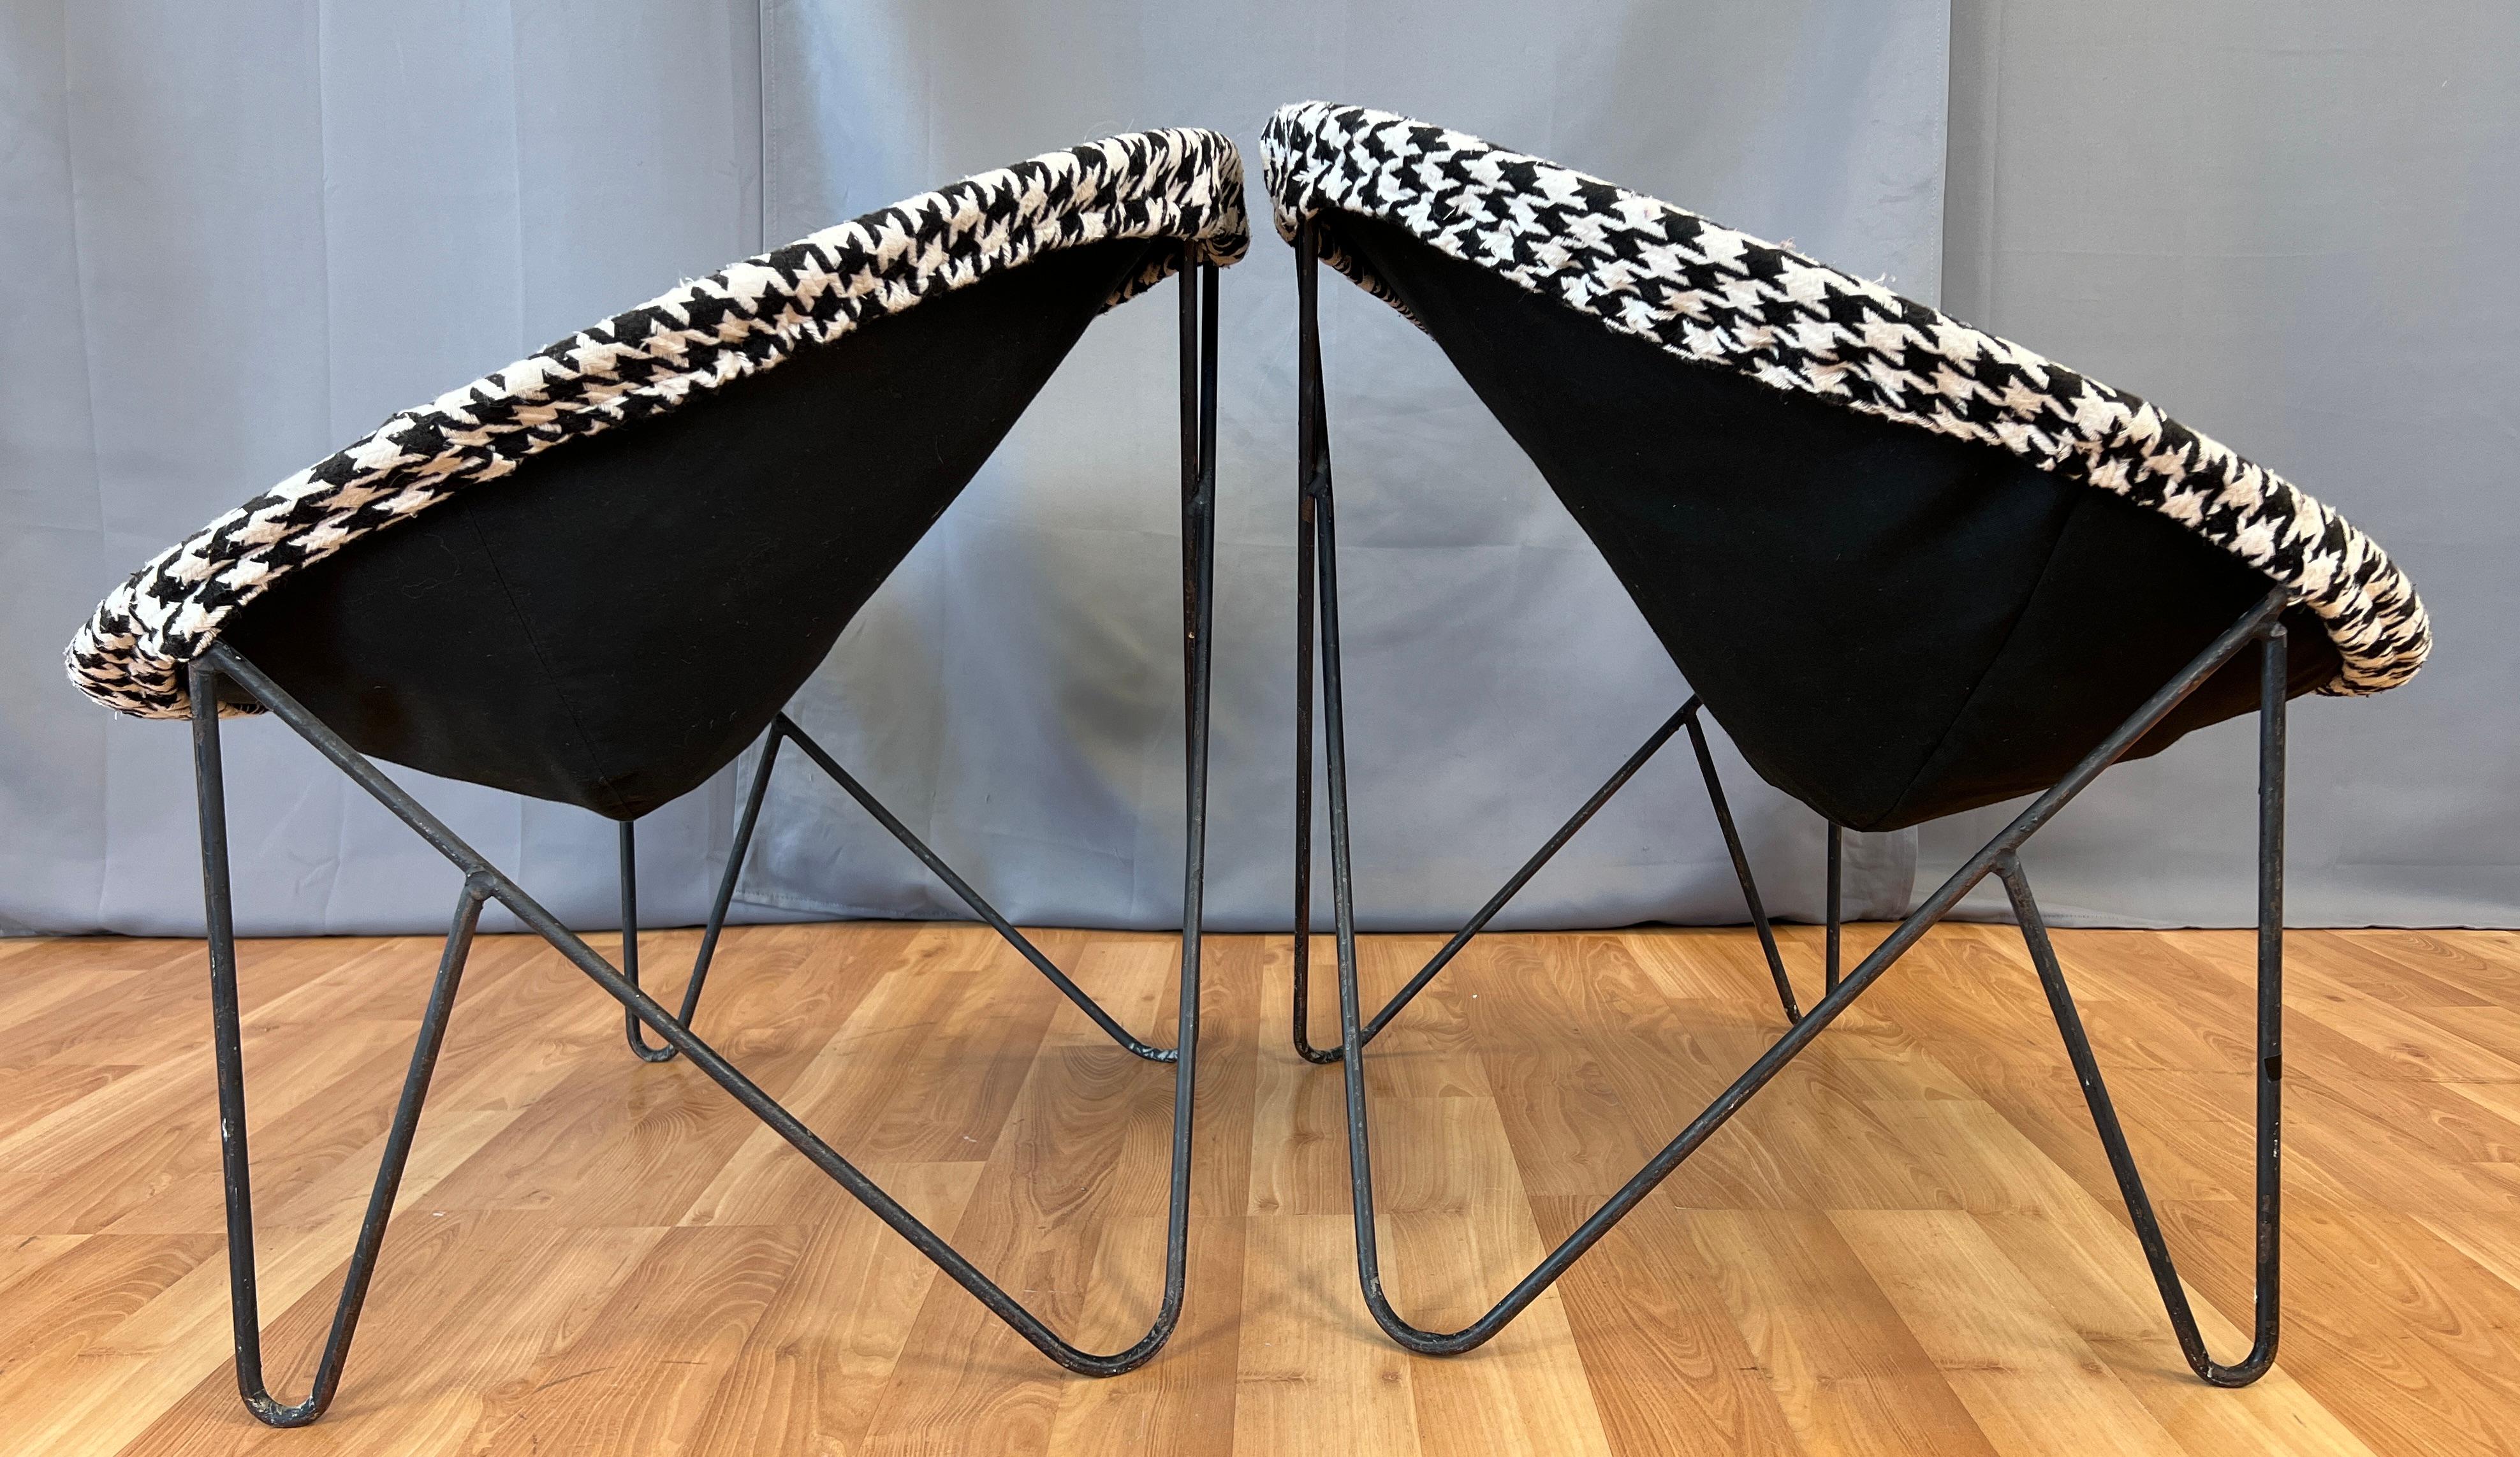 American Pair of Mid-century 1950s Wrought Iron Hoop Chairs Black/White Upholstery  For Sale